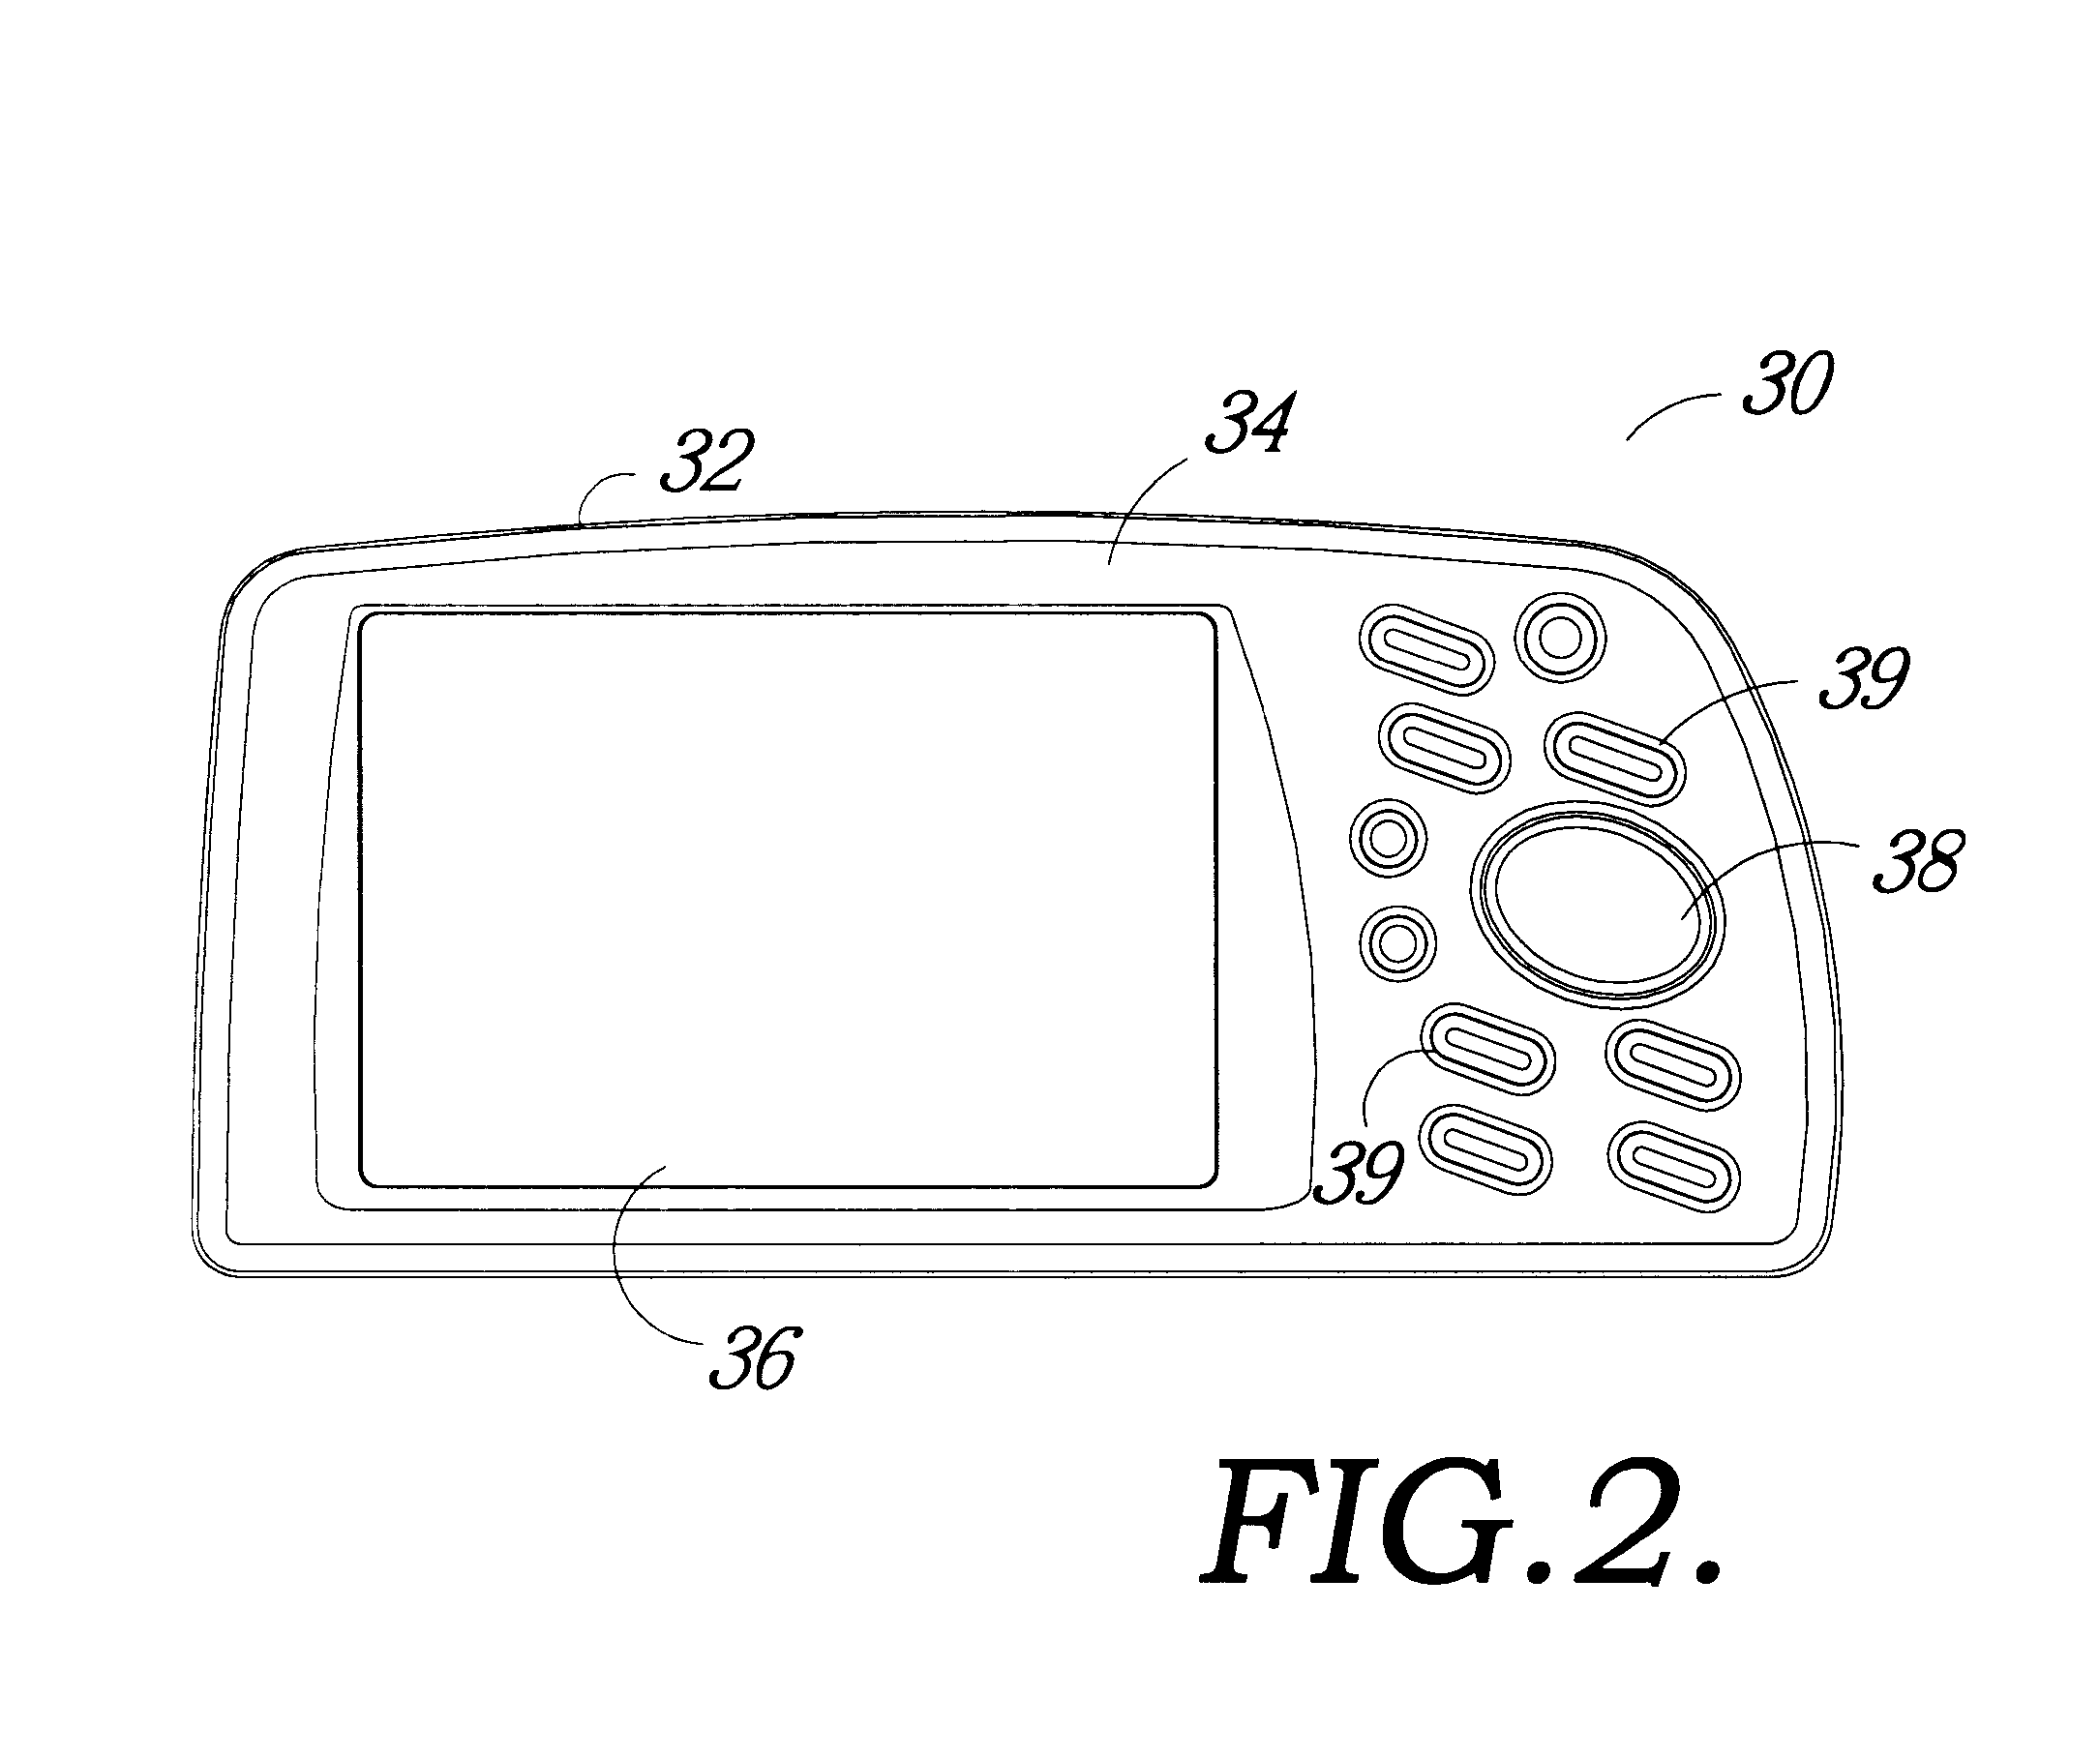 Method and apparatus for storing cartographic route data